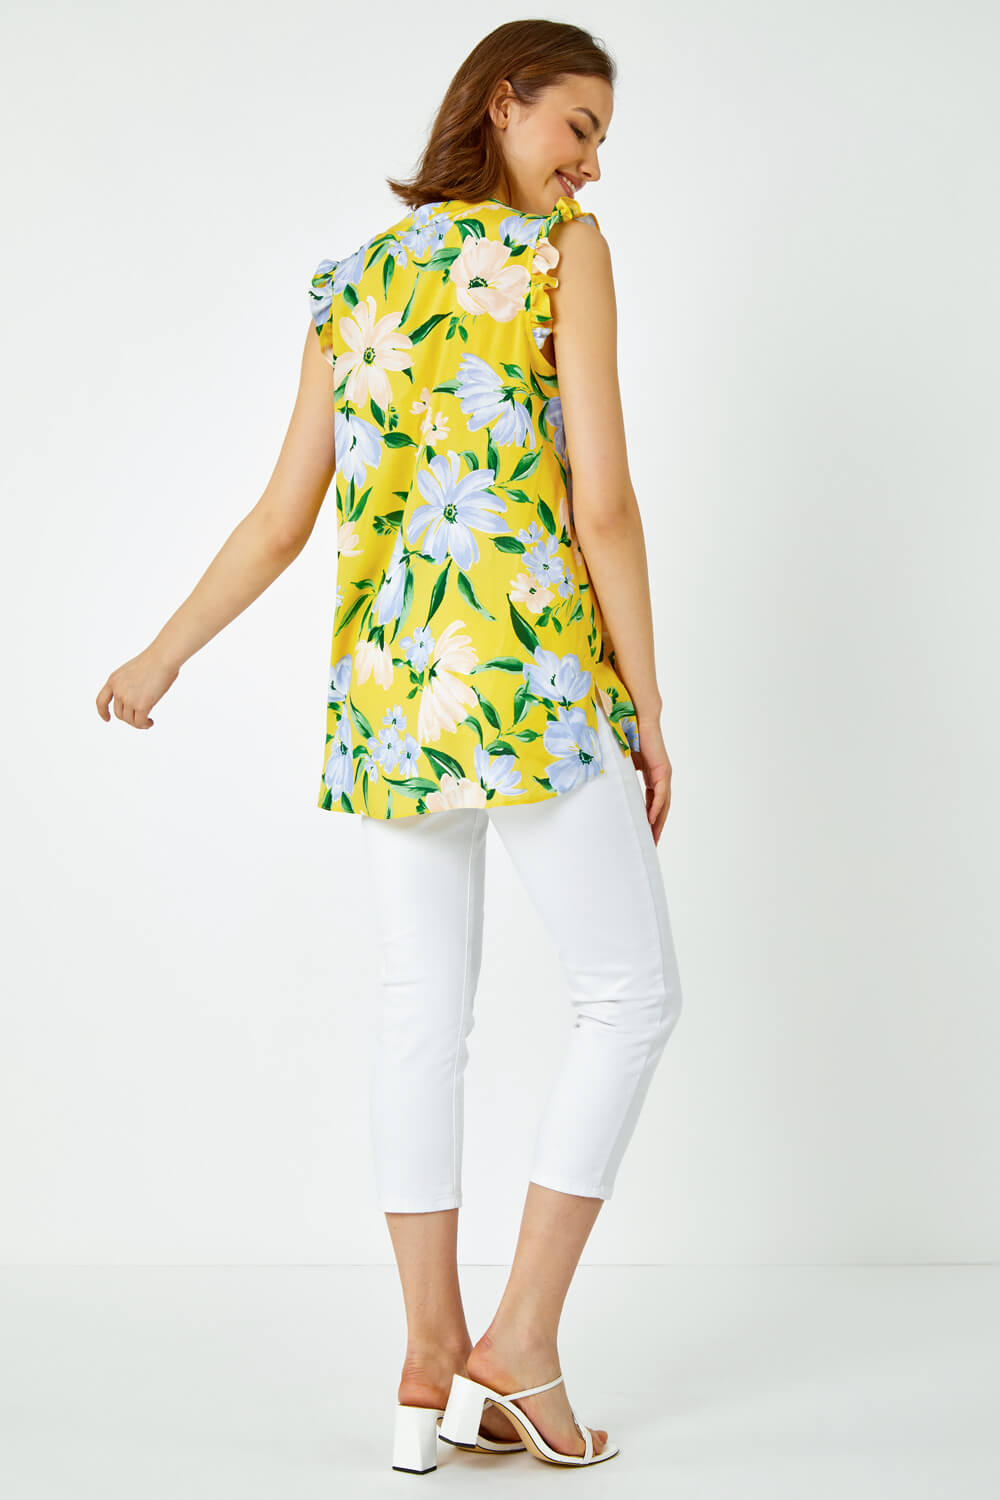 Yellow Floral Print Sleeveless Ruffle Top, Image 3 of 5